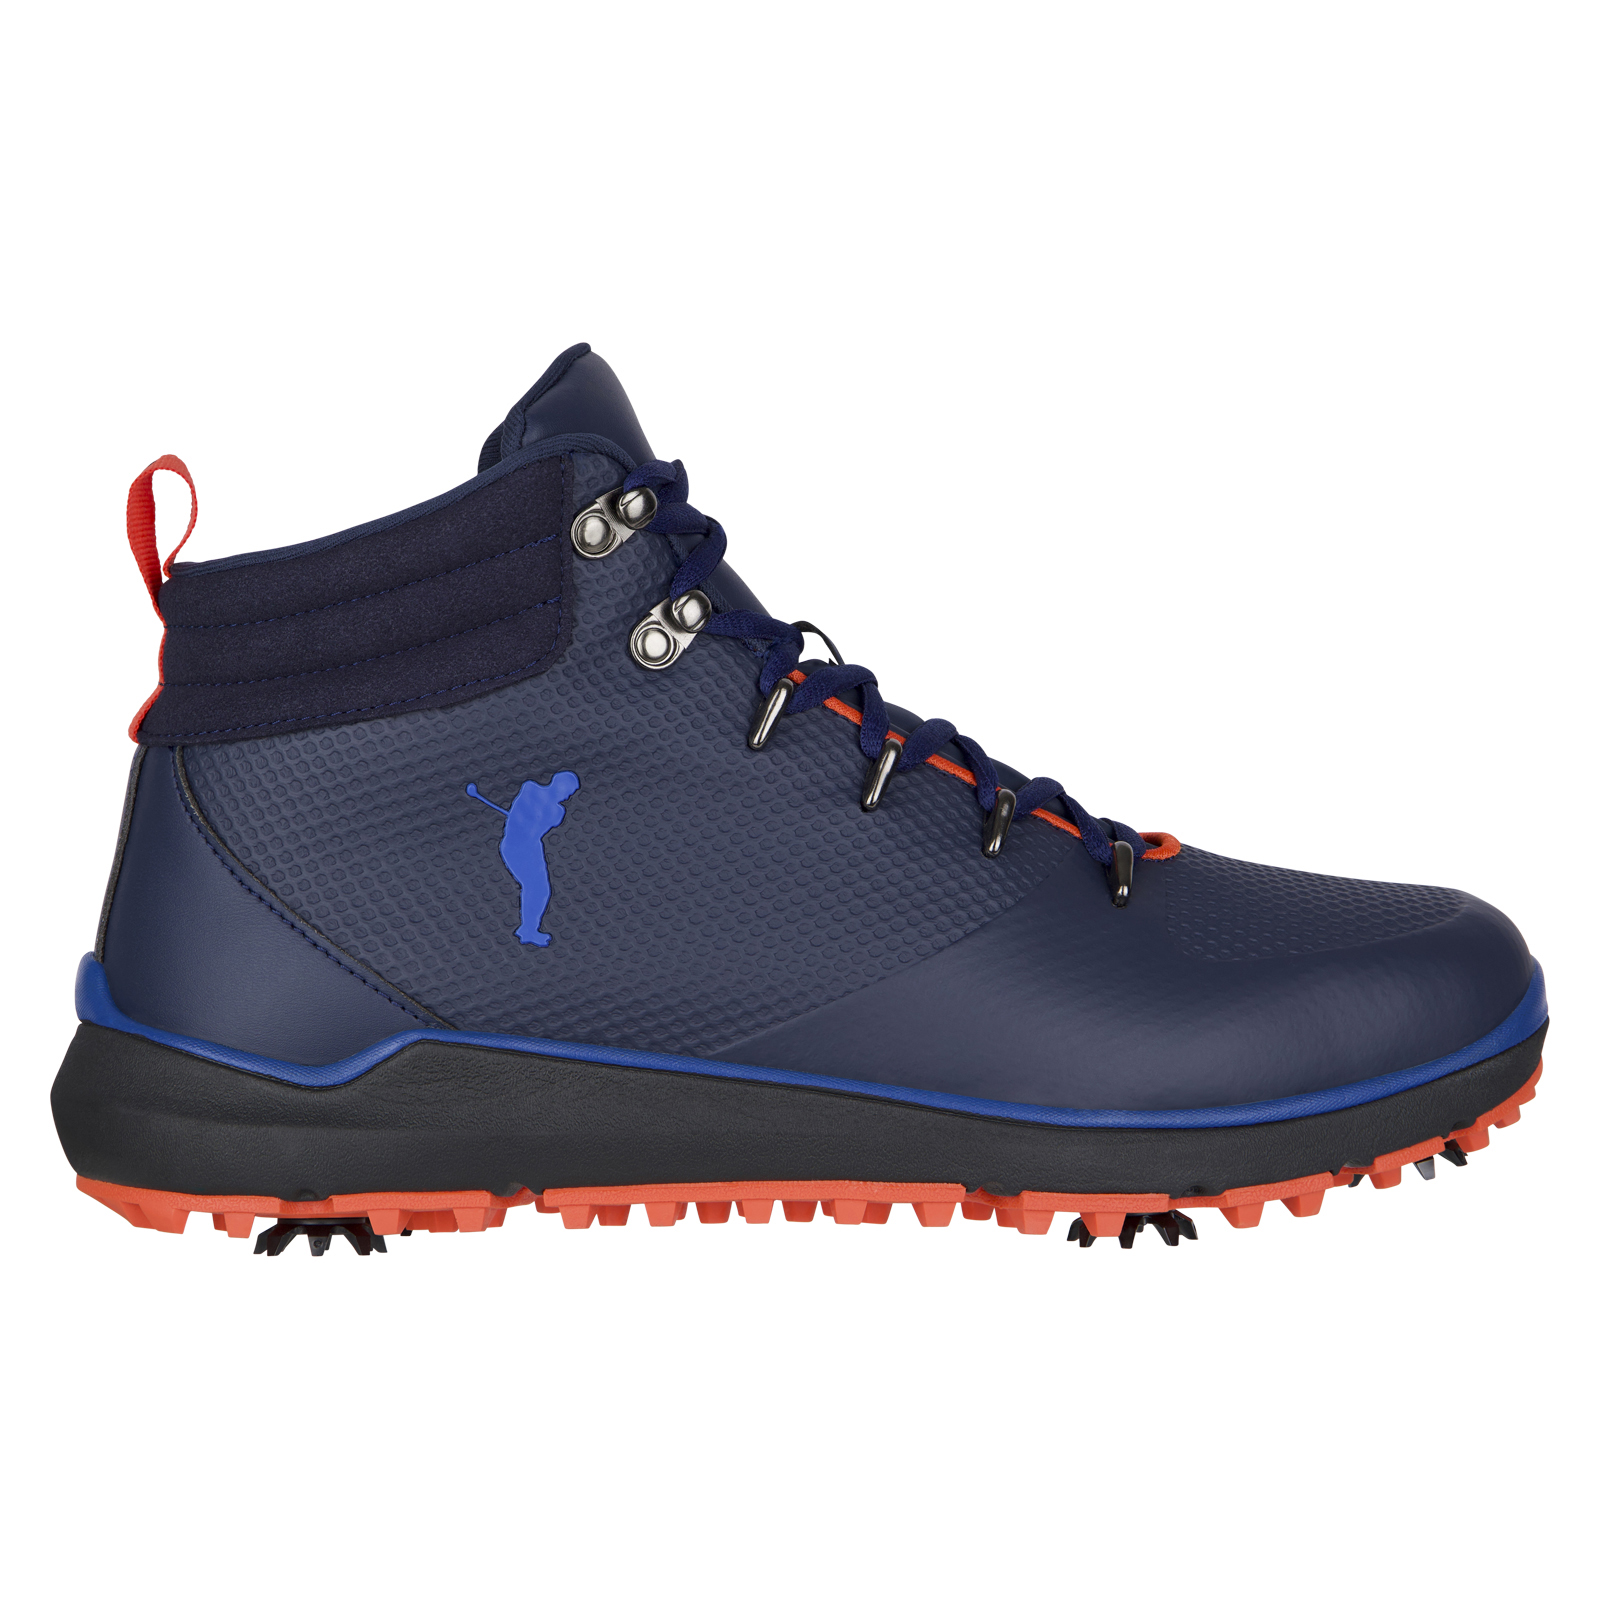 Men's waterproof golf boots with removable spikes